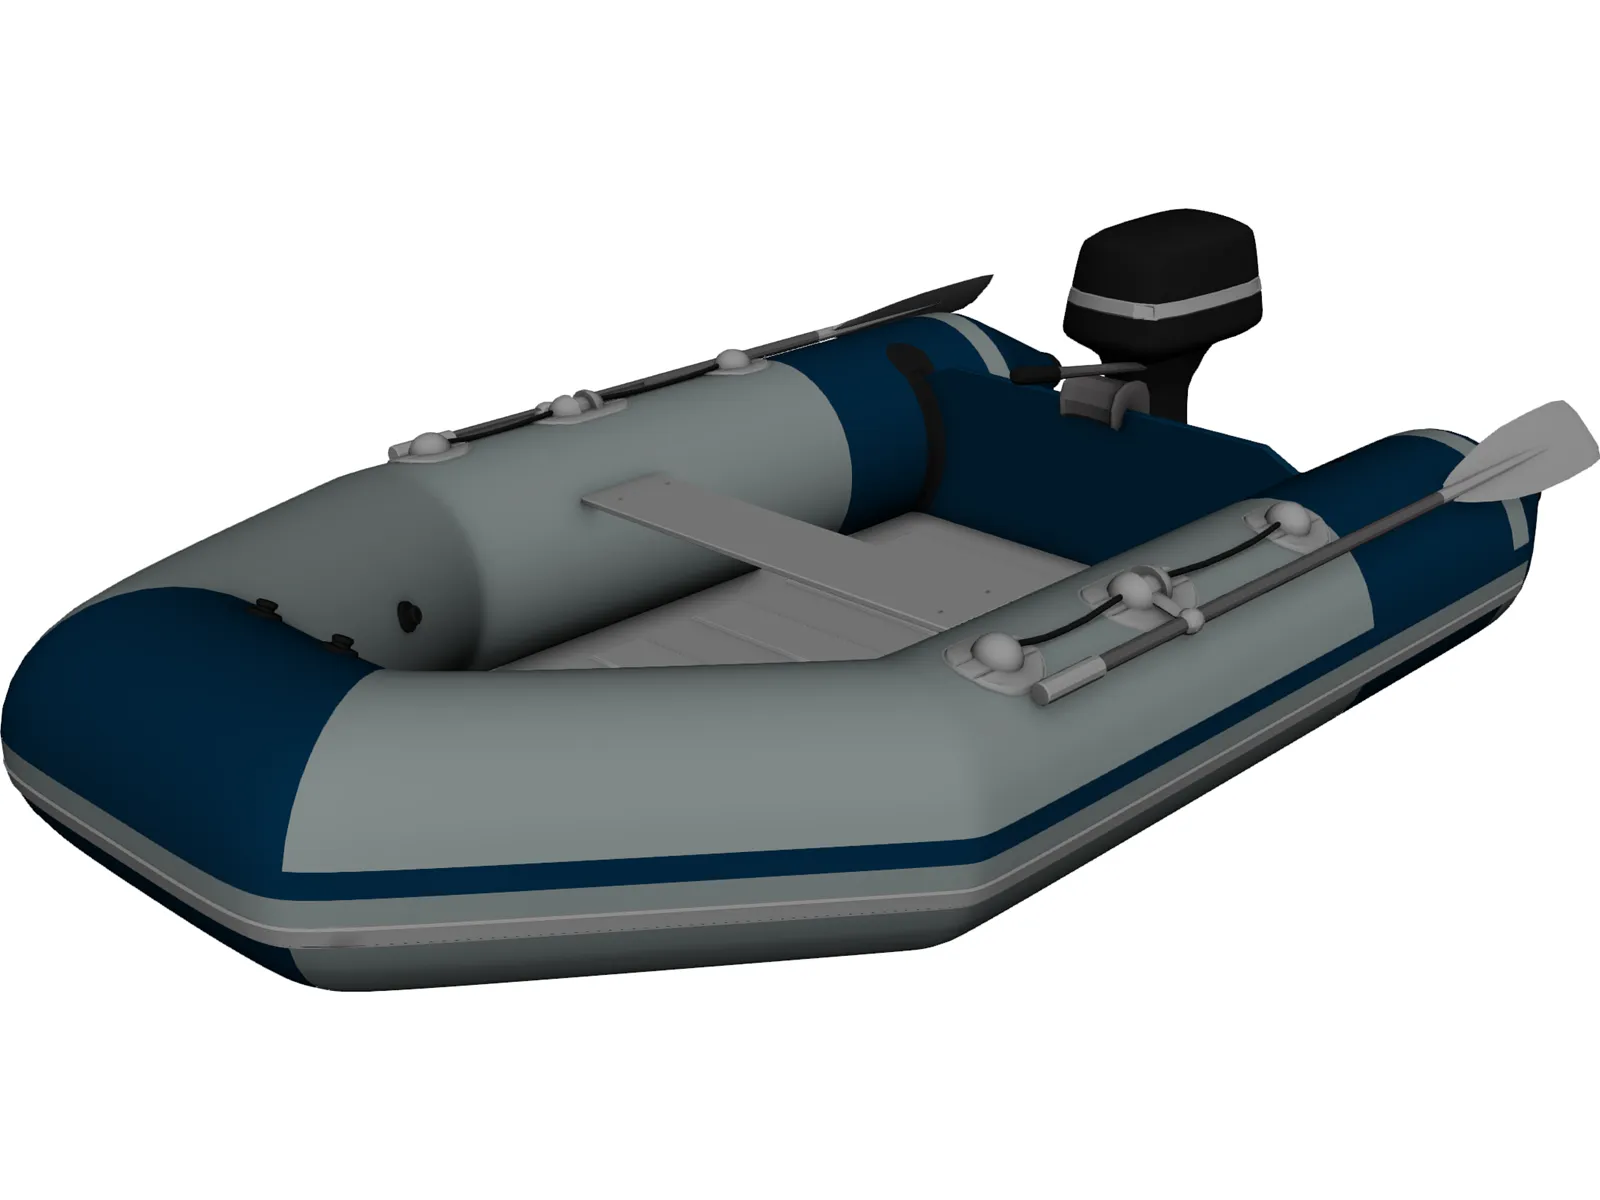 Zodimo Zodiac Boat with Outboard Motor 3D Model